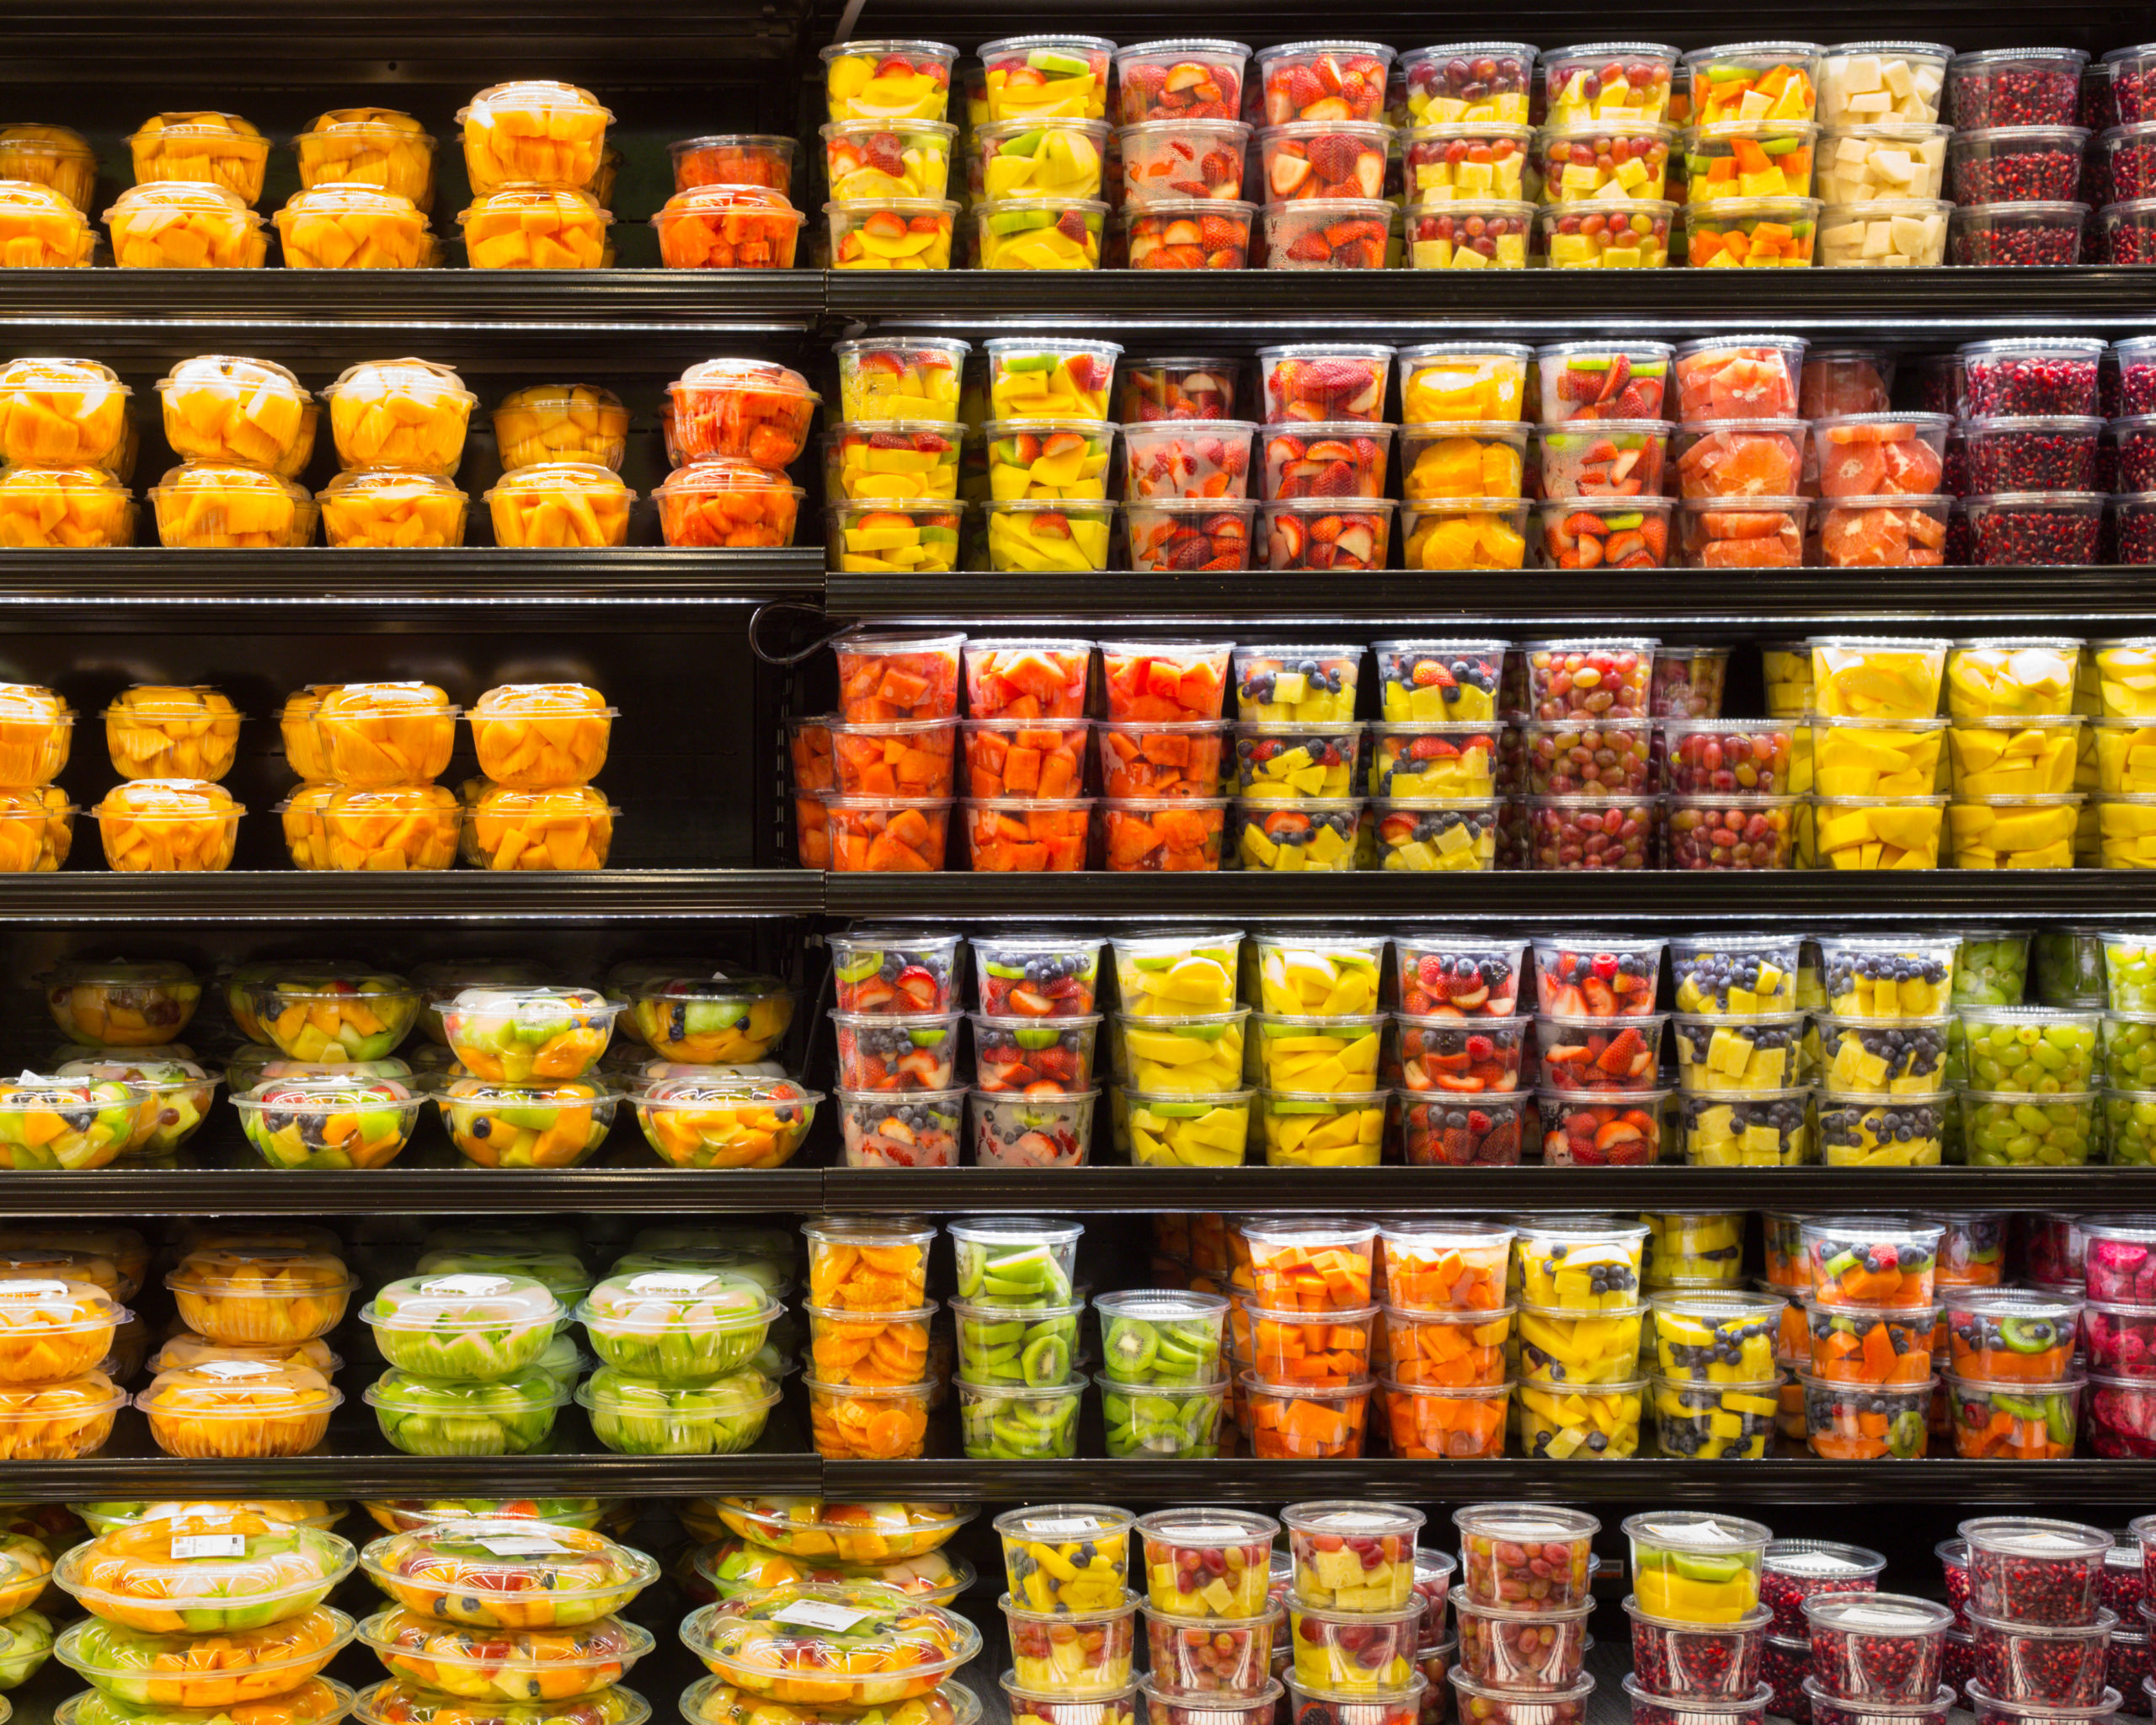 Assortment of cut fruit in containers on display for sale at FNGs remain popular Grab N' Go items at all stores.